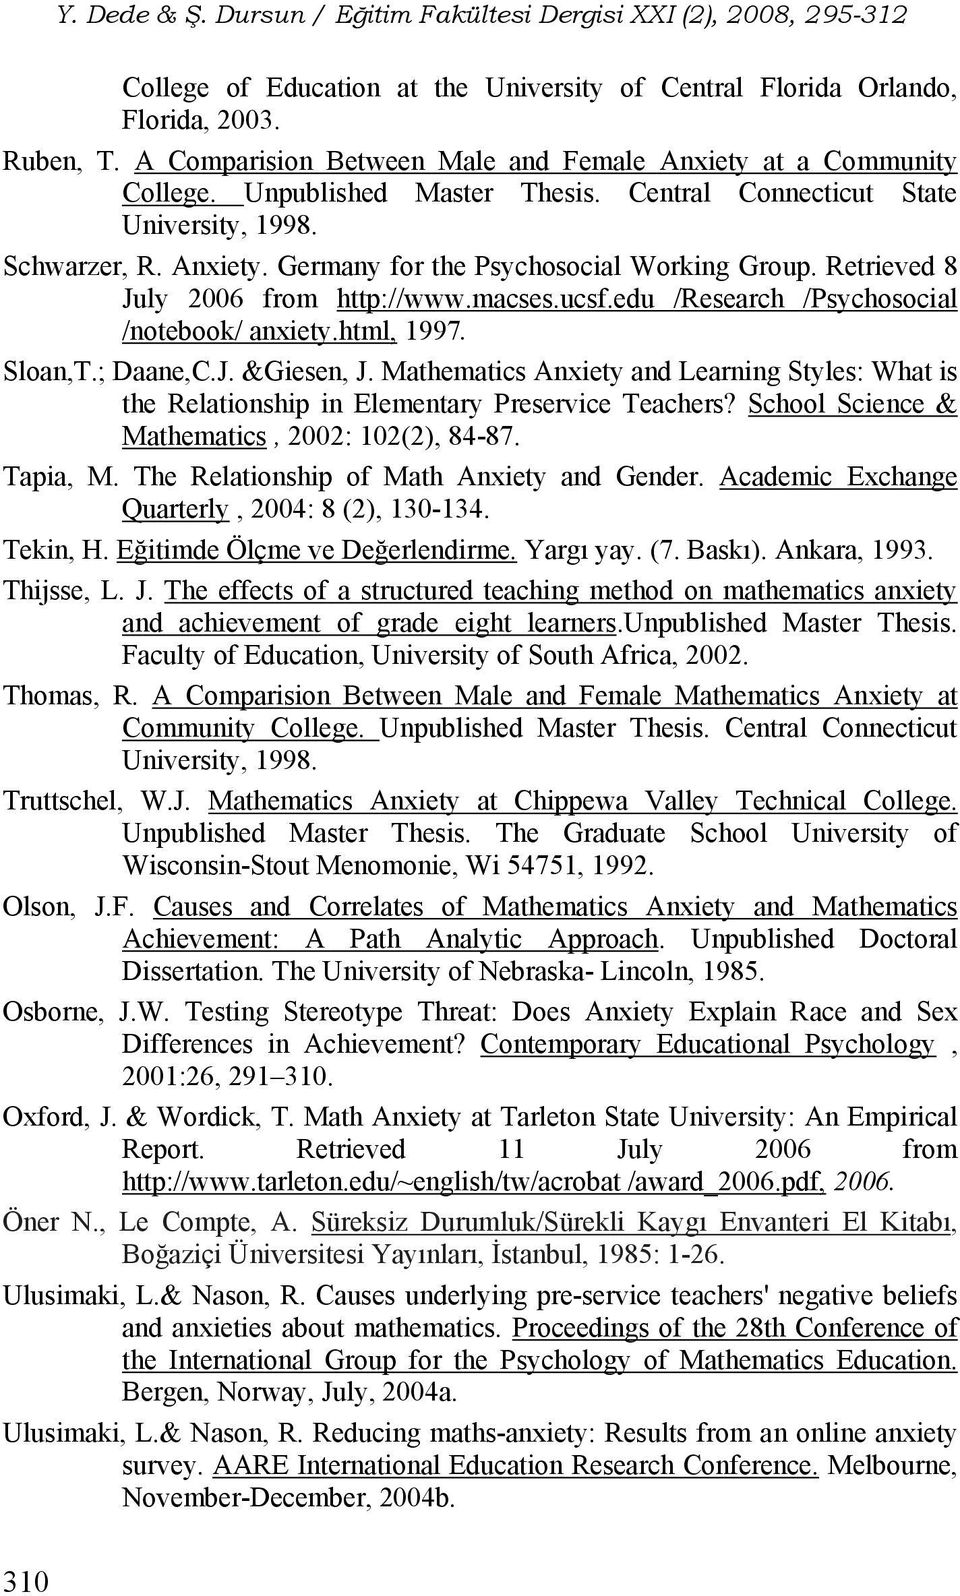 edu /Research /Psychosocial /notebook/ anxiety.html, 1997. Sloan,T.; Daane,C.J. &Giesen, J. Mathematics Anxiety and Learning Styles: What is the Relationship in Elementary Preservice Teachers?